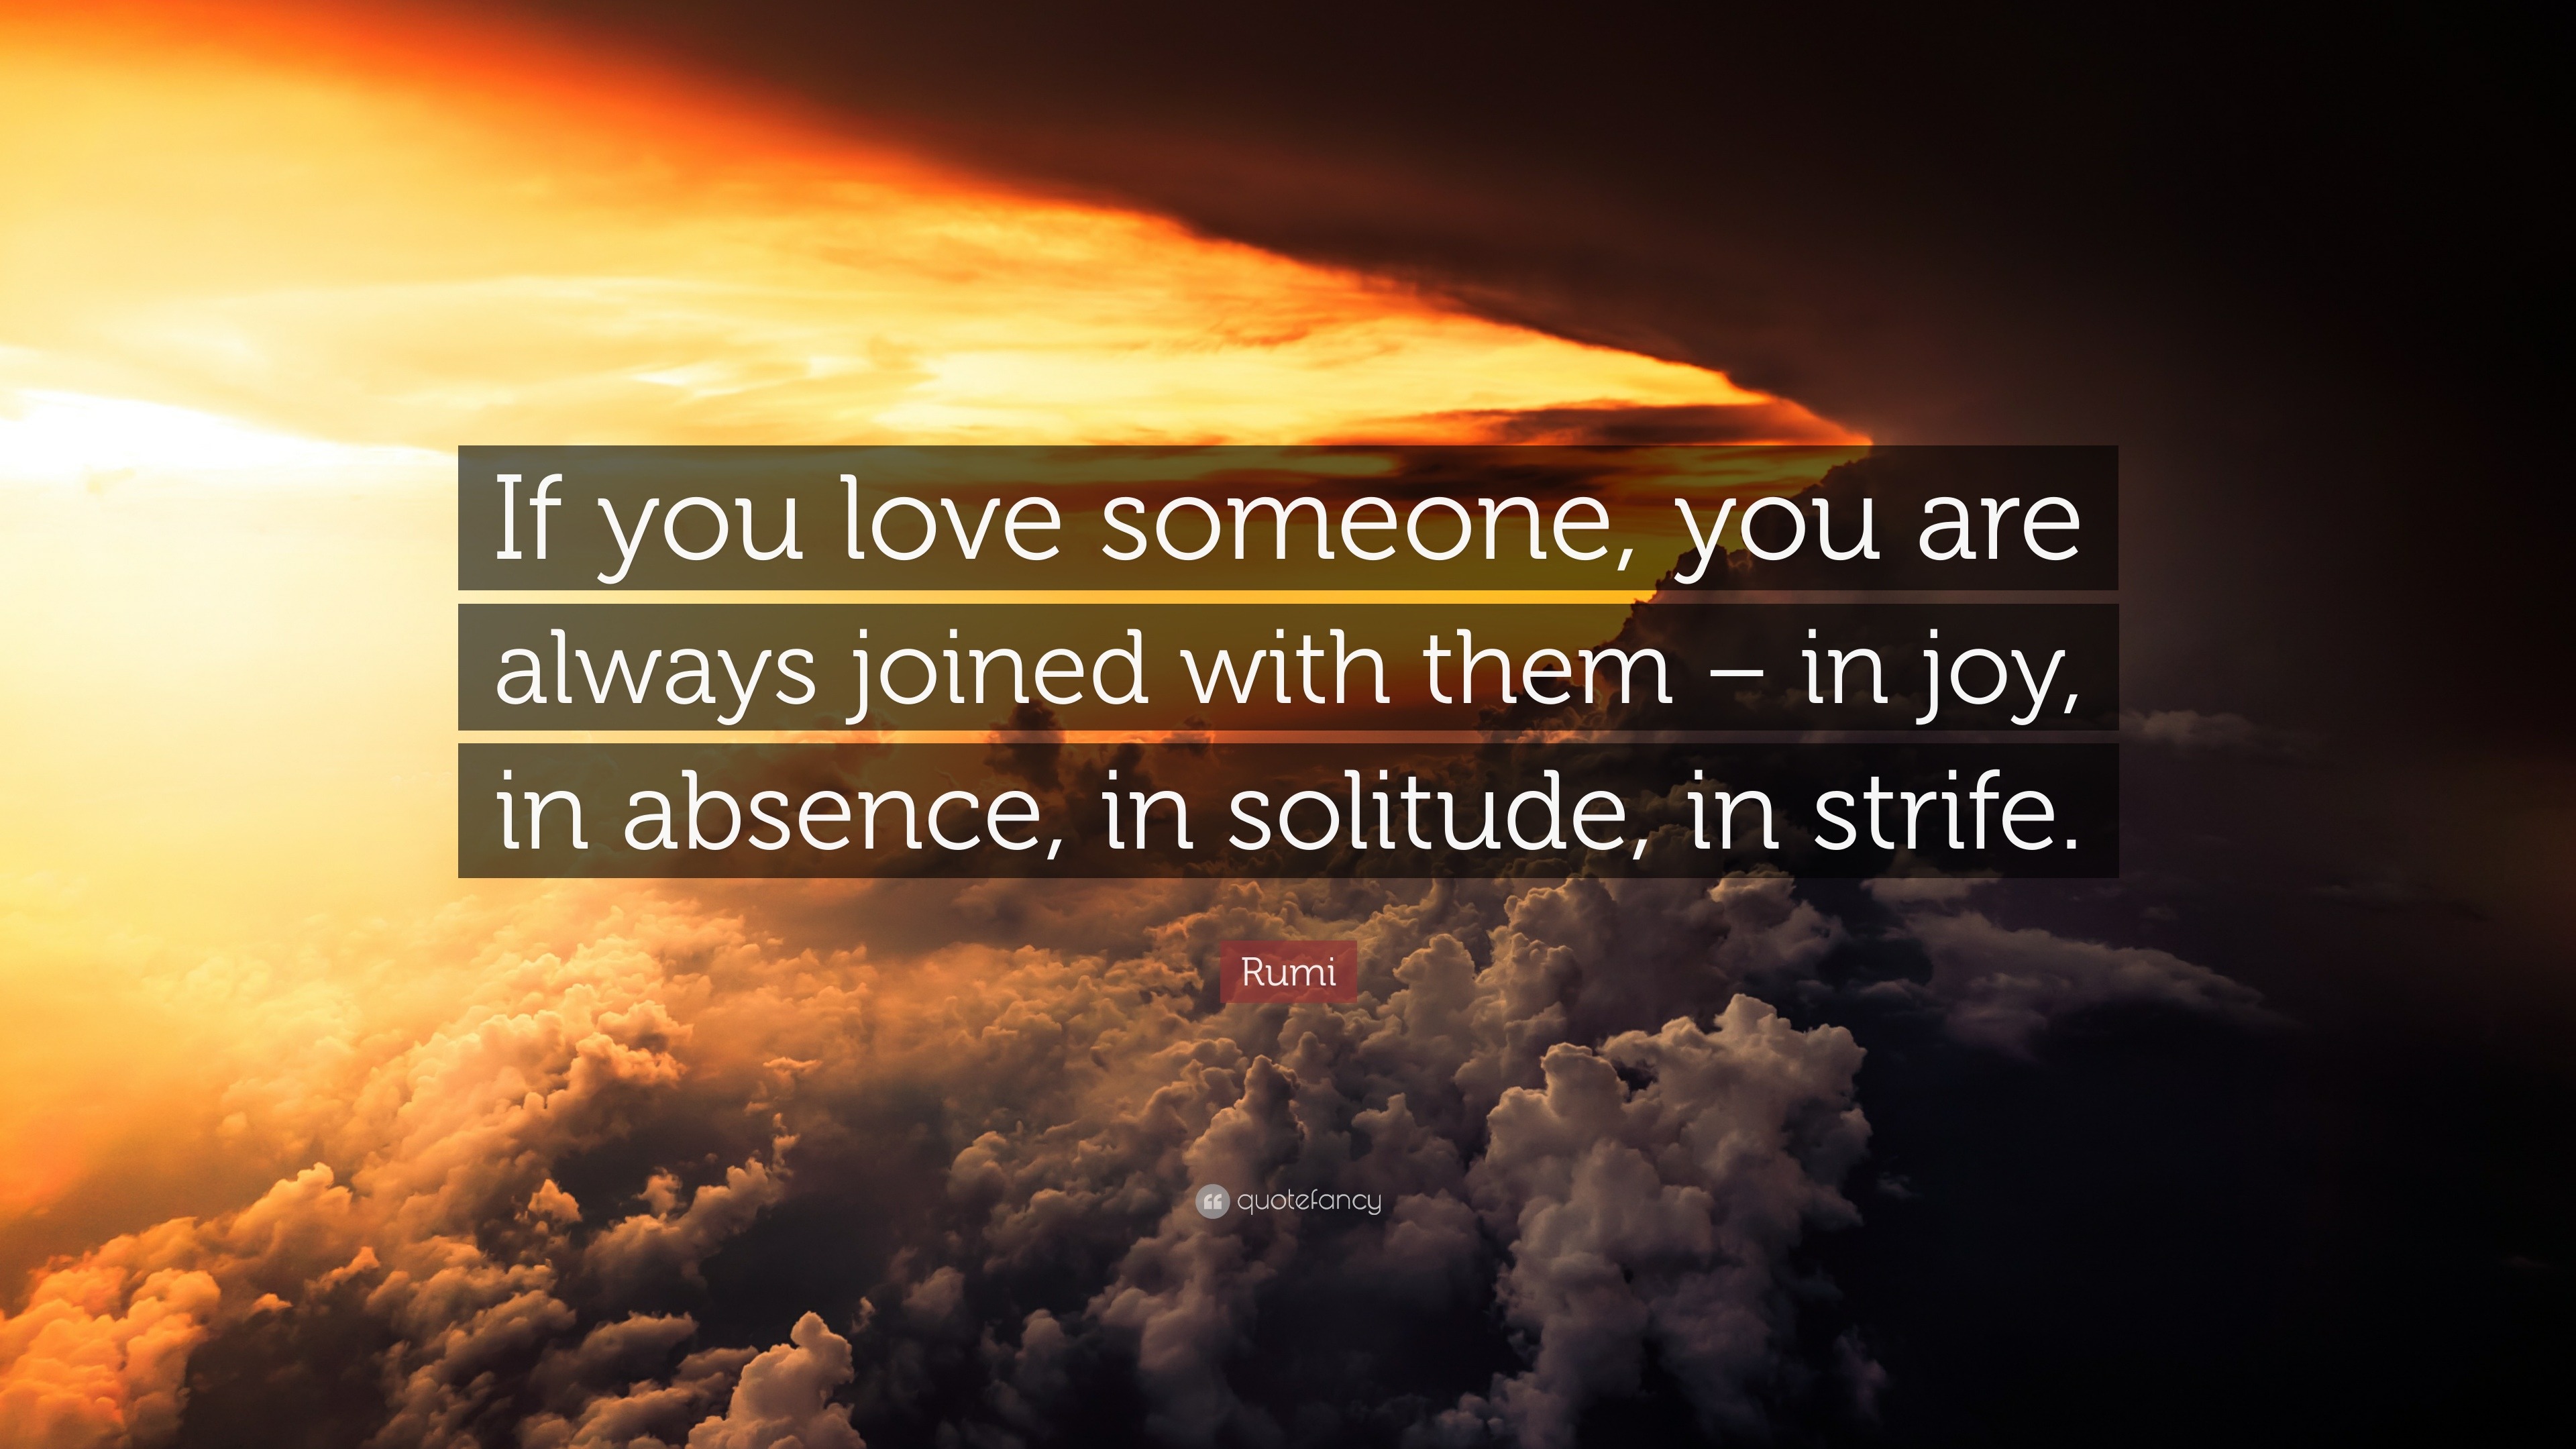 Rumi Quote “If you love someone, you are always joined